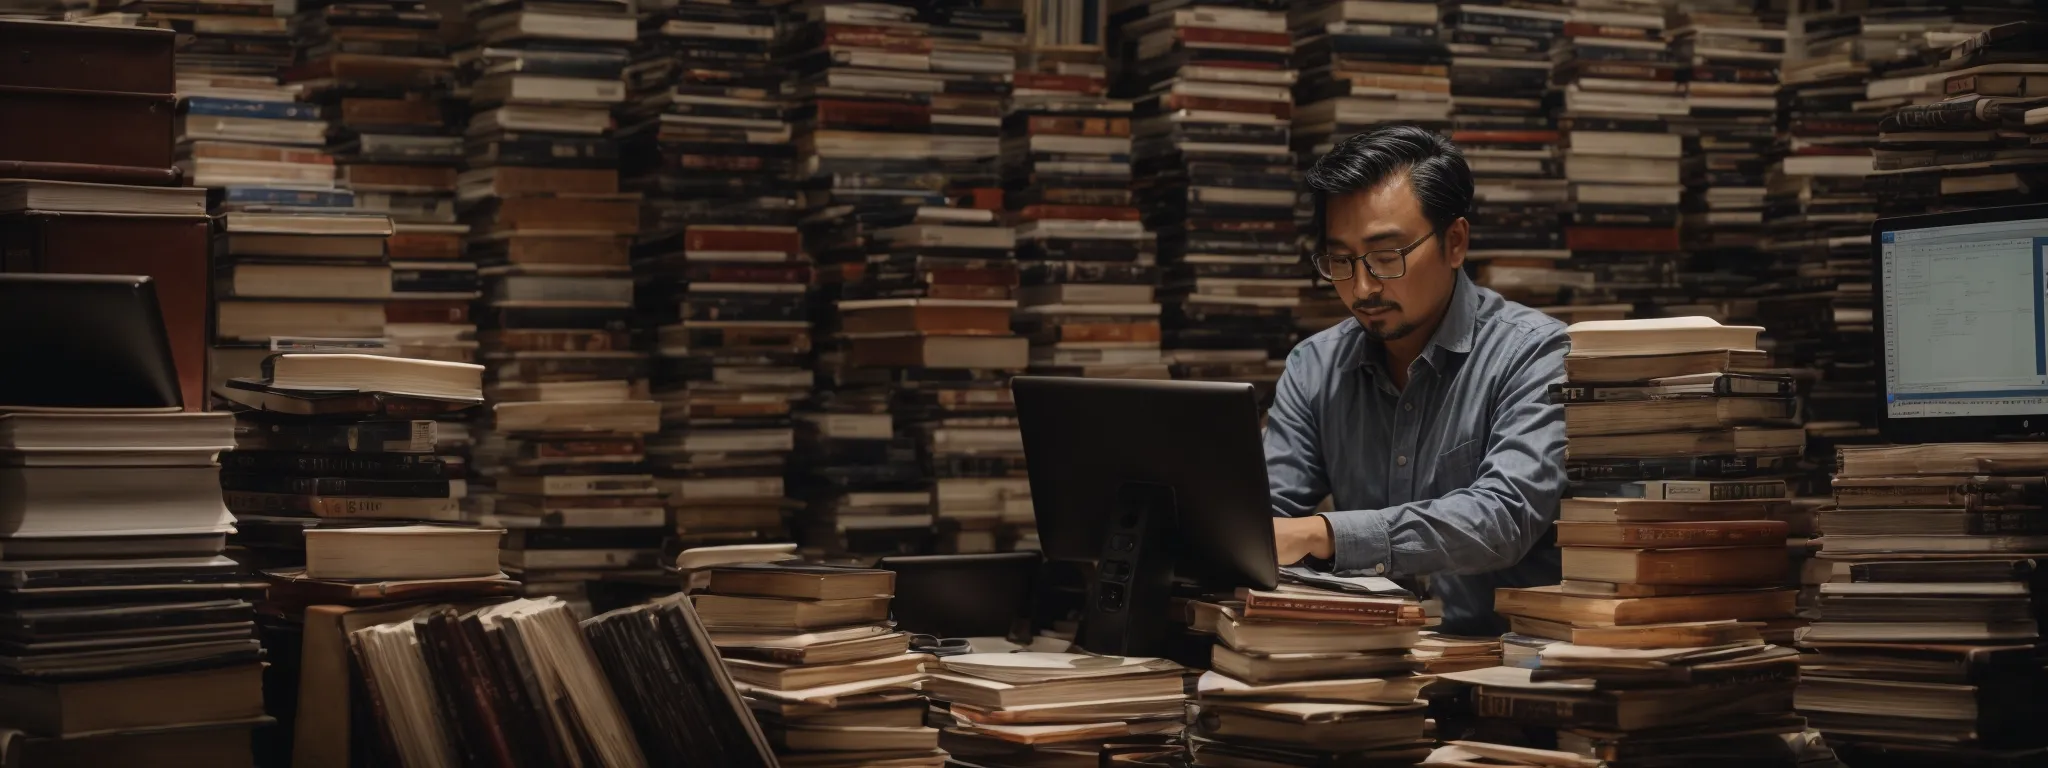 a determined author surrounded by piles of books, intently analyzing a computer screen displaying graphs and data.